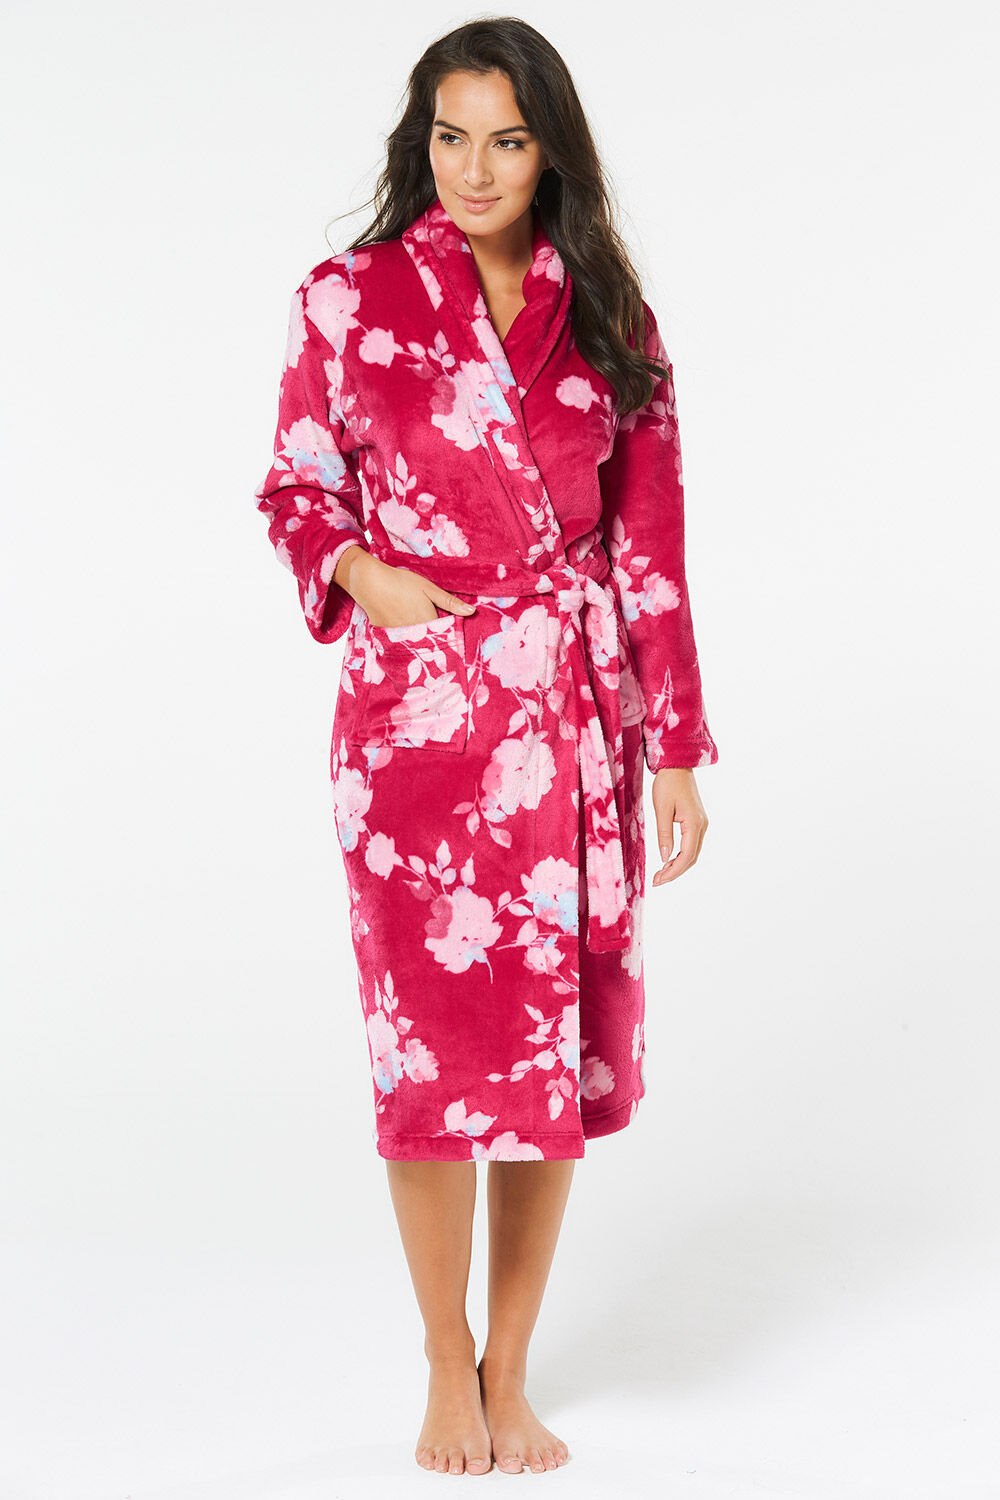 Pink Fleece Dressing Gown | Lingerie | George at ASDA